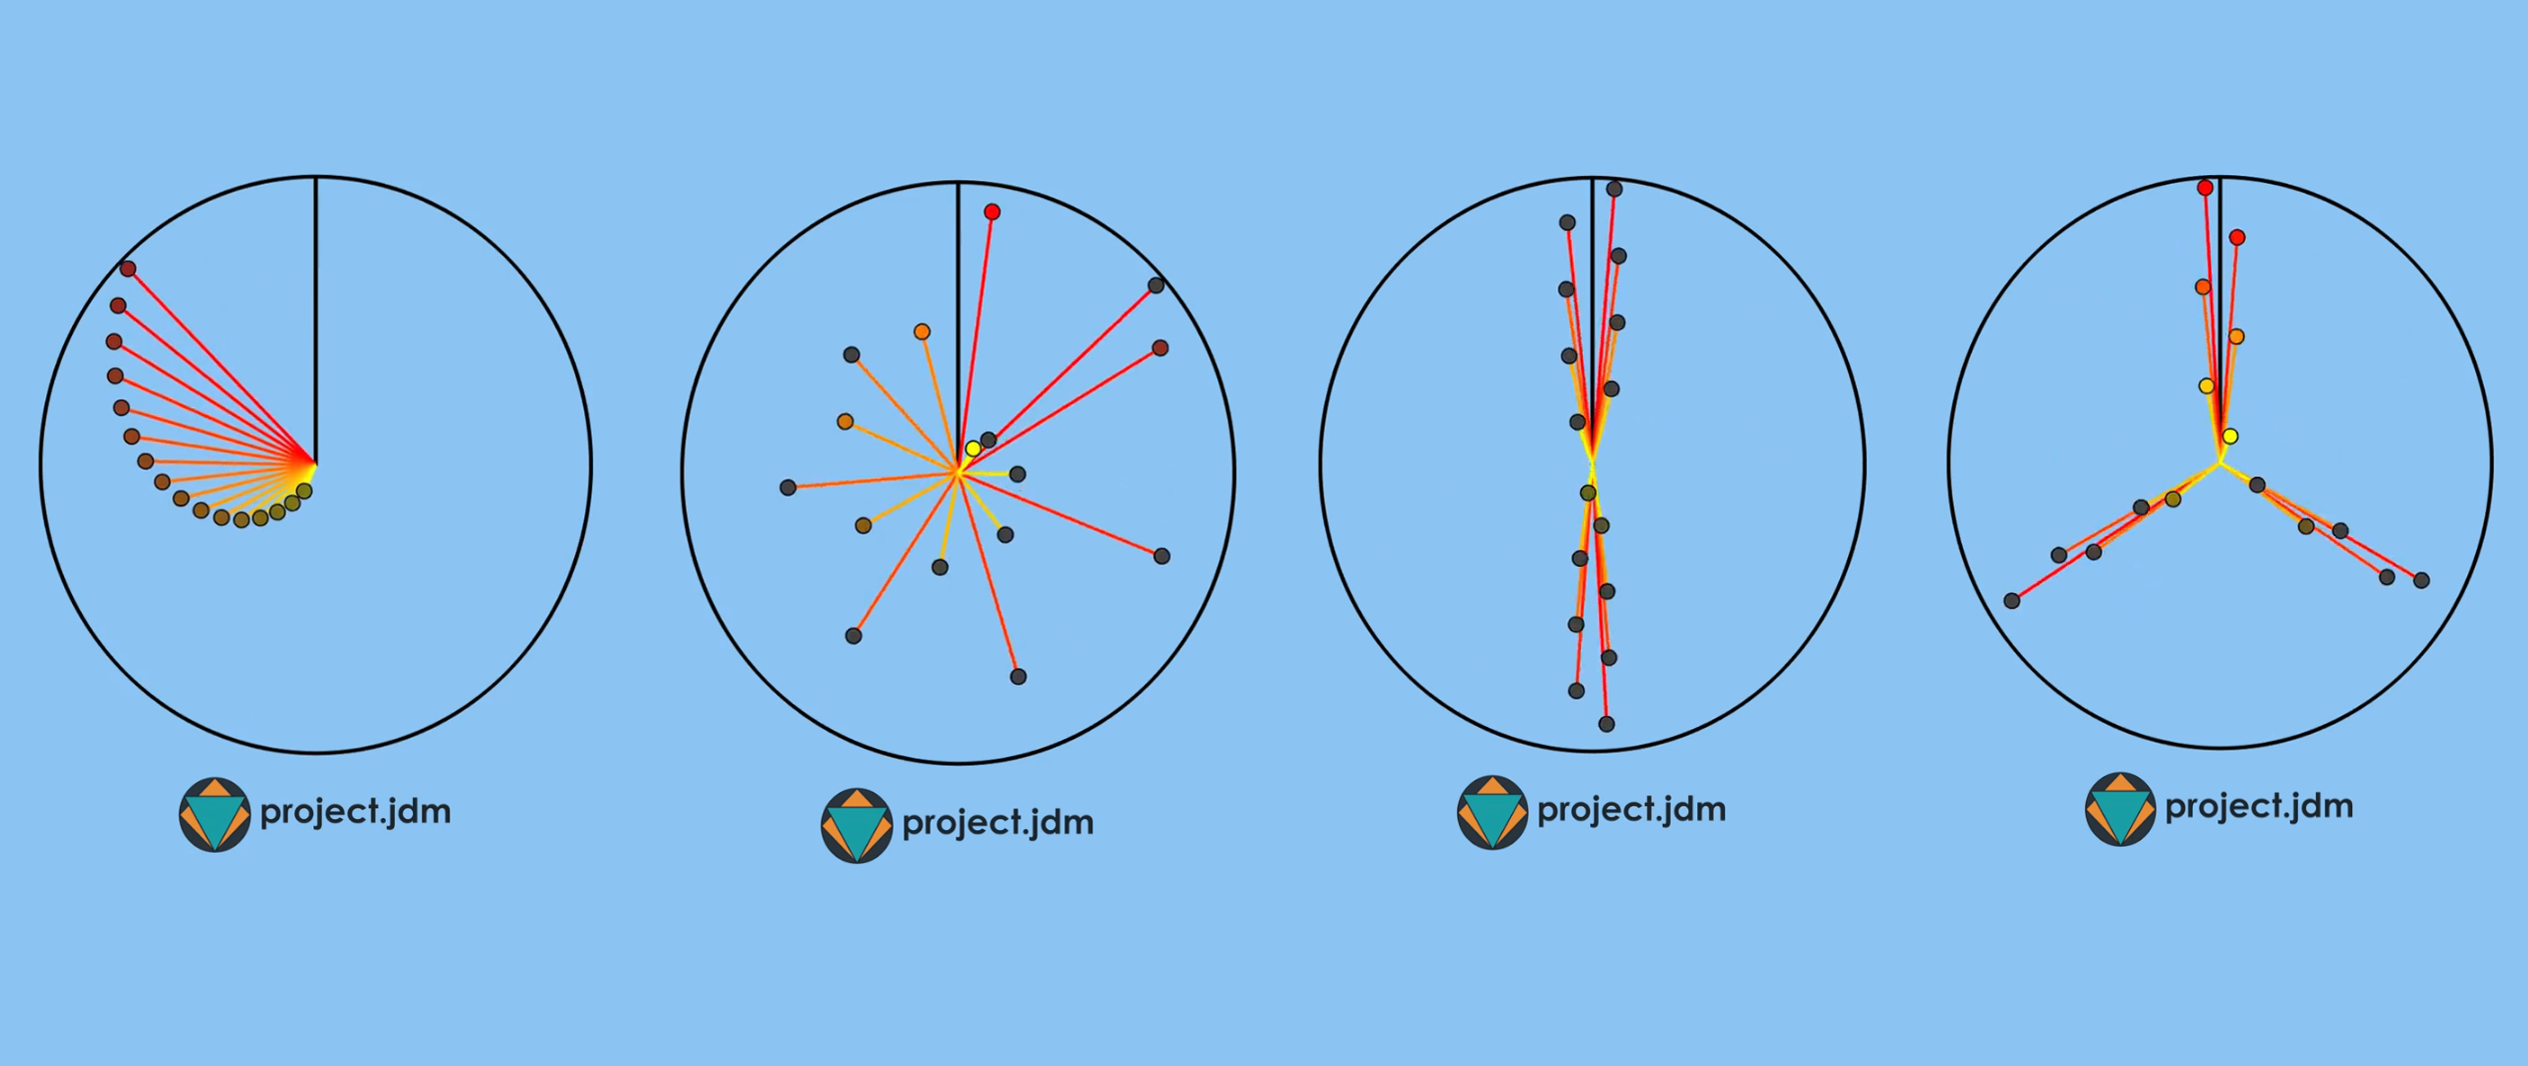 Four different moments in Project JDM’s pendulum video. At different moments, the pendulums appear as individual agents, while at others they appear as larger combined entities